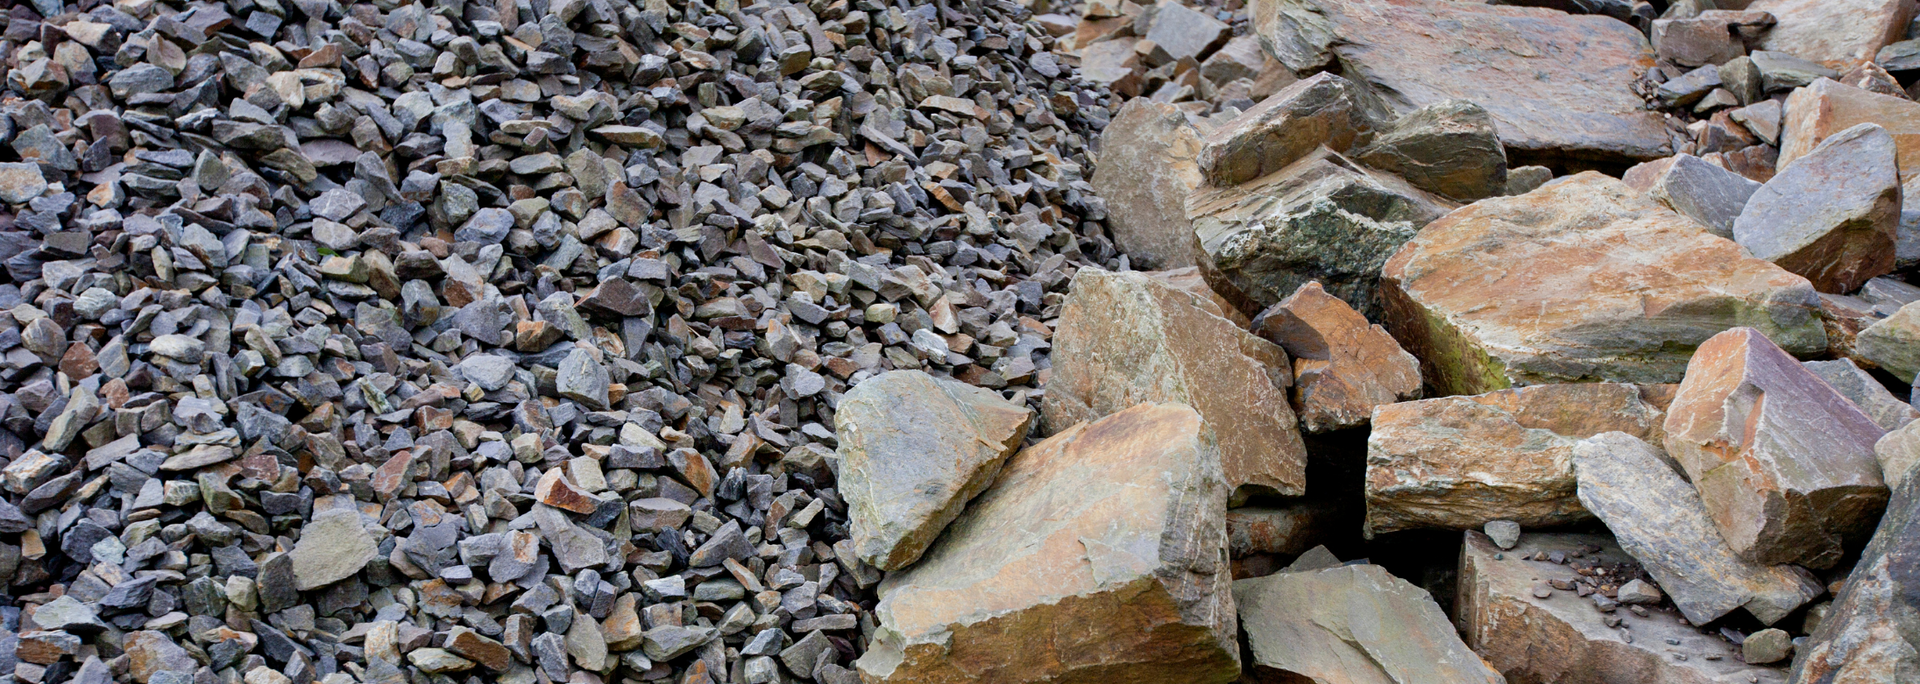 Picture of a mix of rocks of different sizes.
